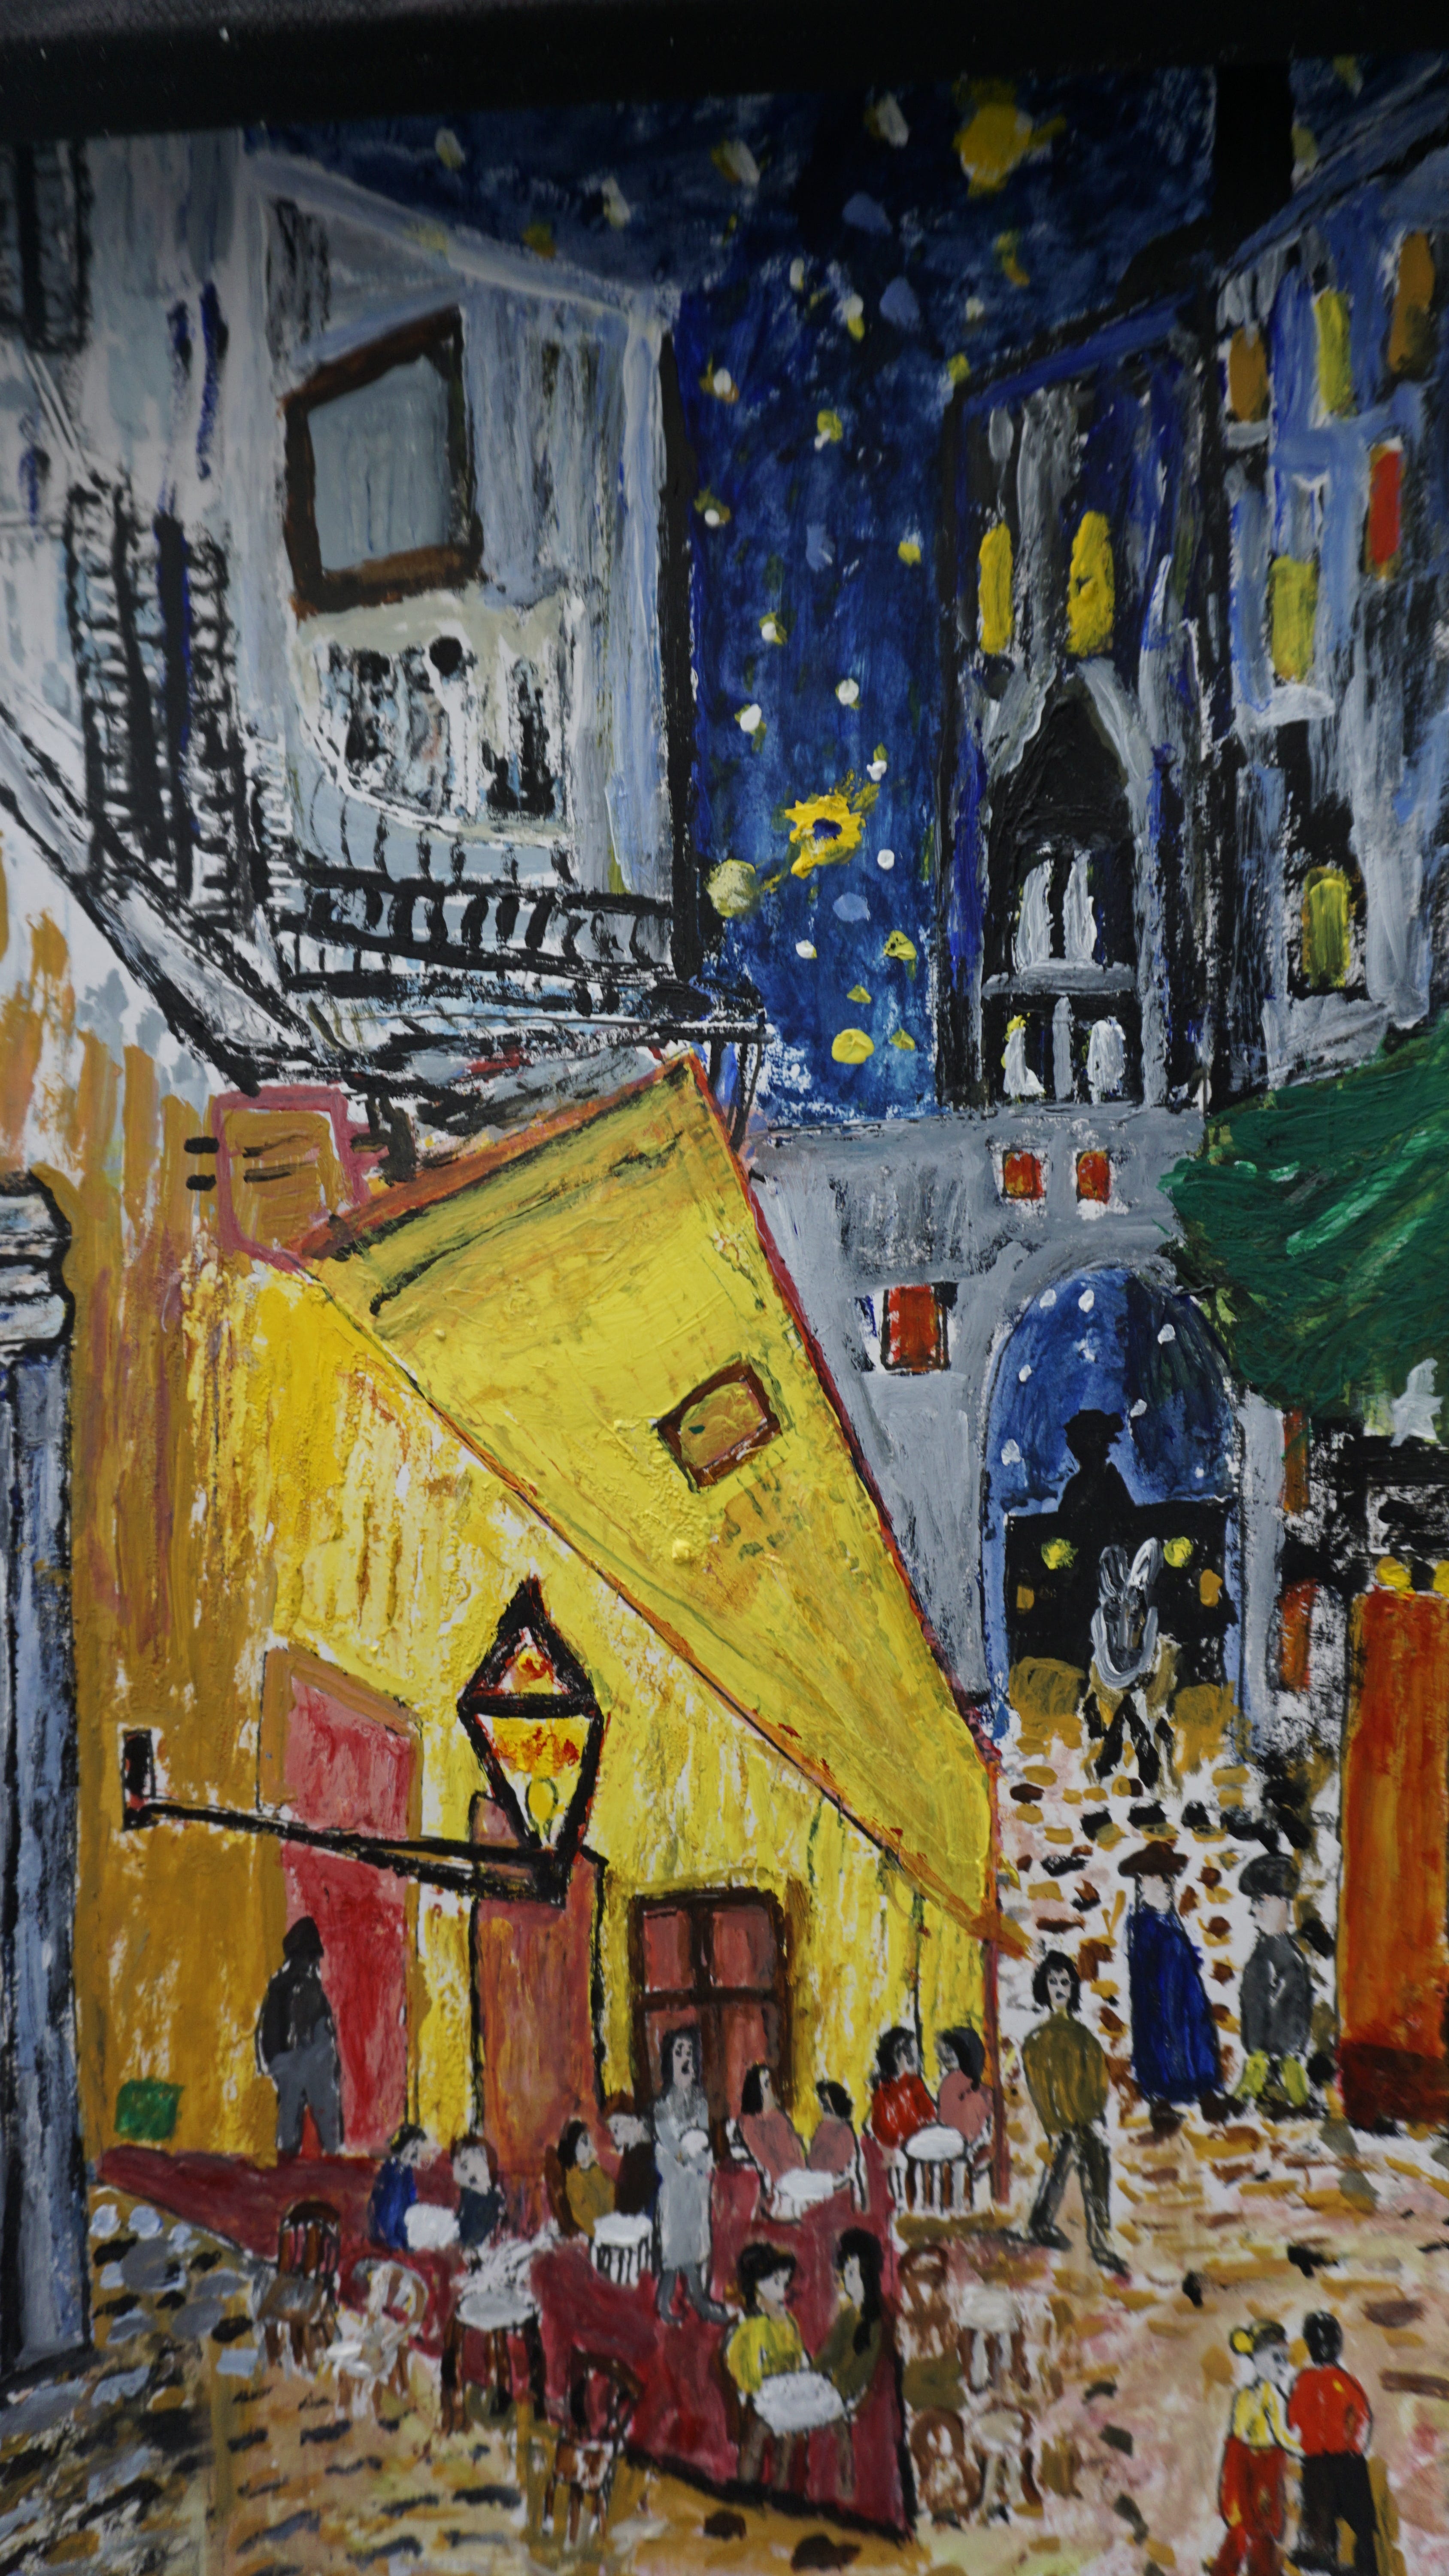 Paintings by inmates, such as this colorful depiction of a town at night, hang on walls throughout Halden Prison in Norway.